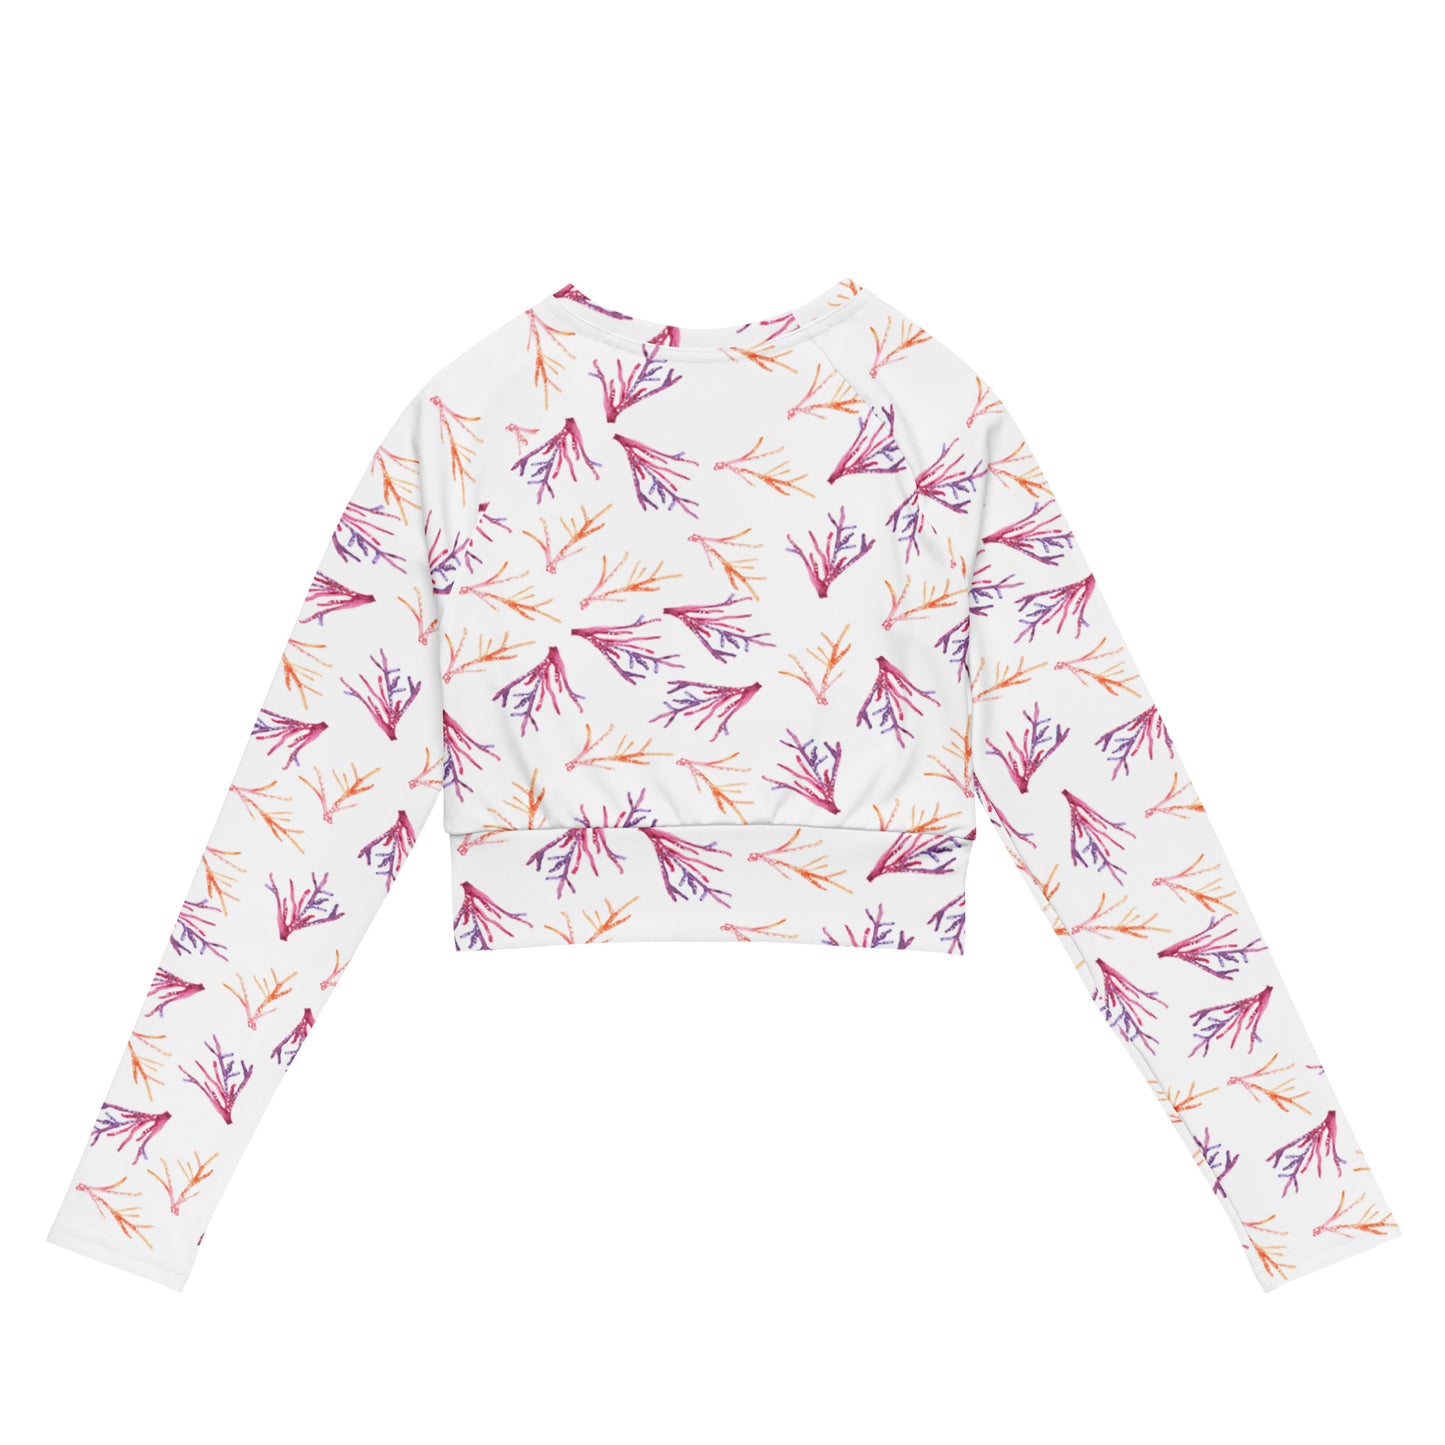 Petrea Pink Coral Print Recycled long-sleeve Rash Guard - White background!